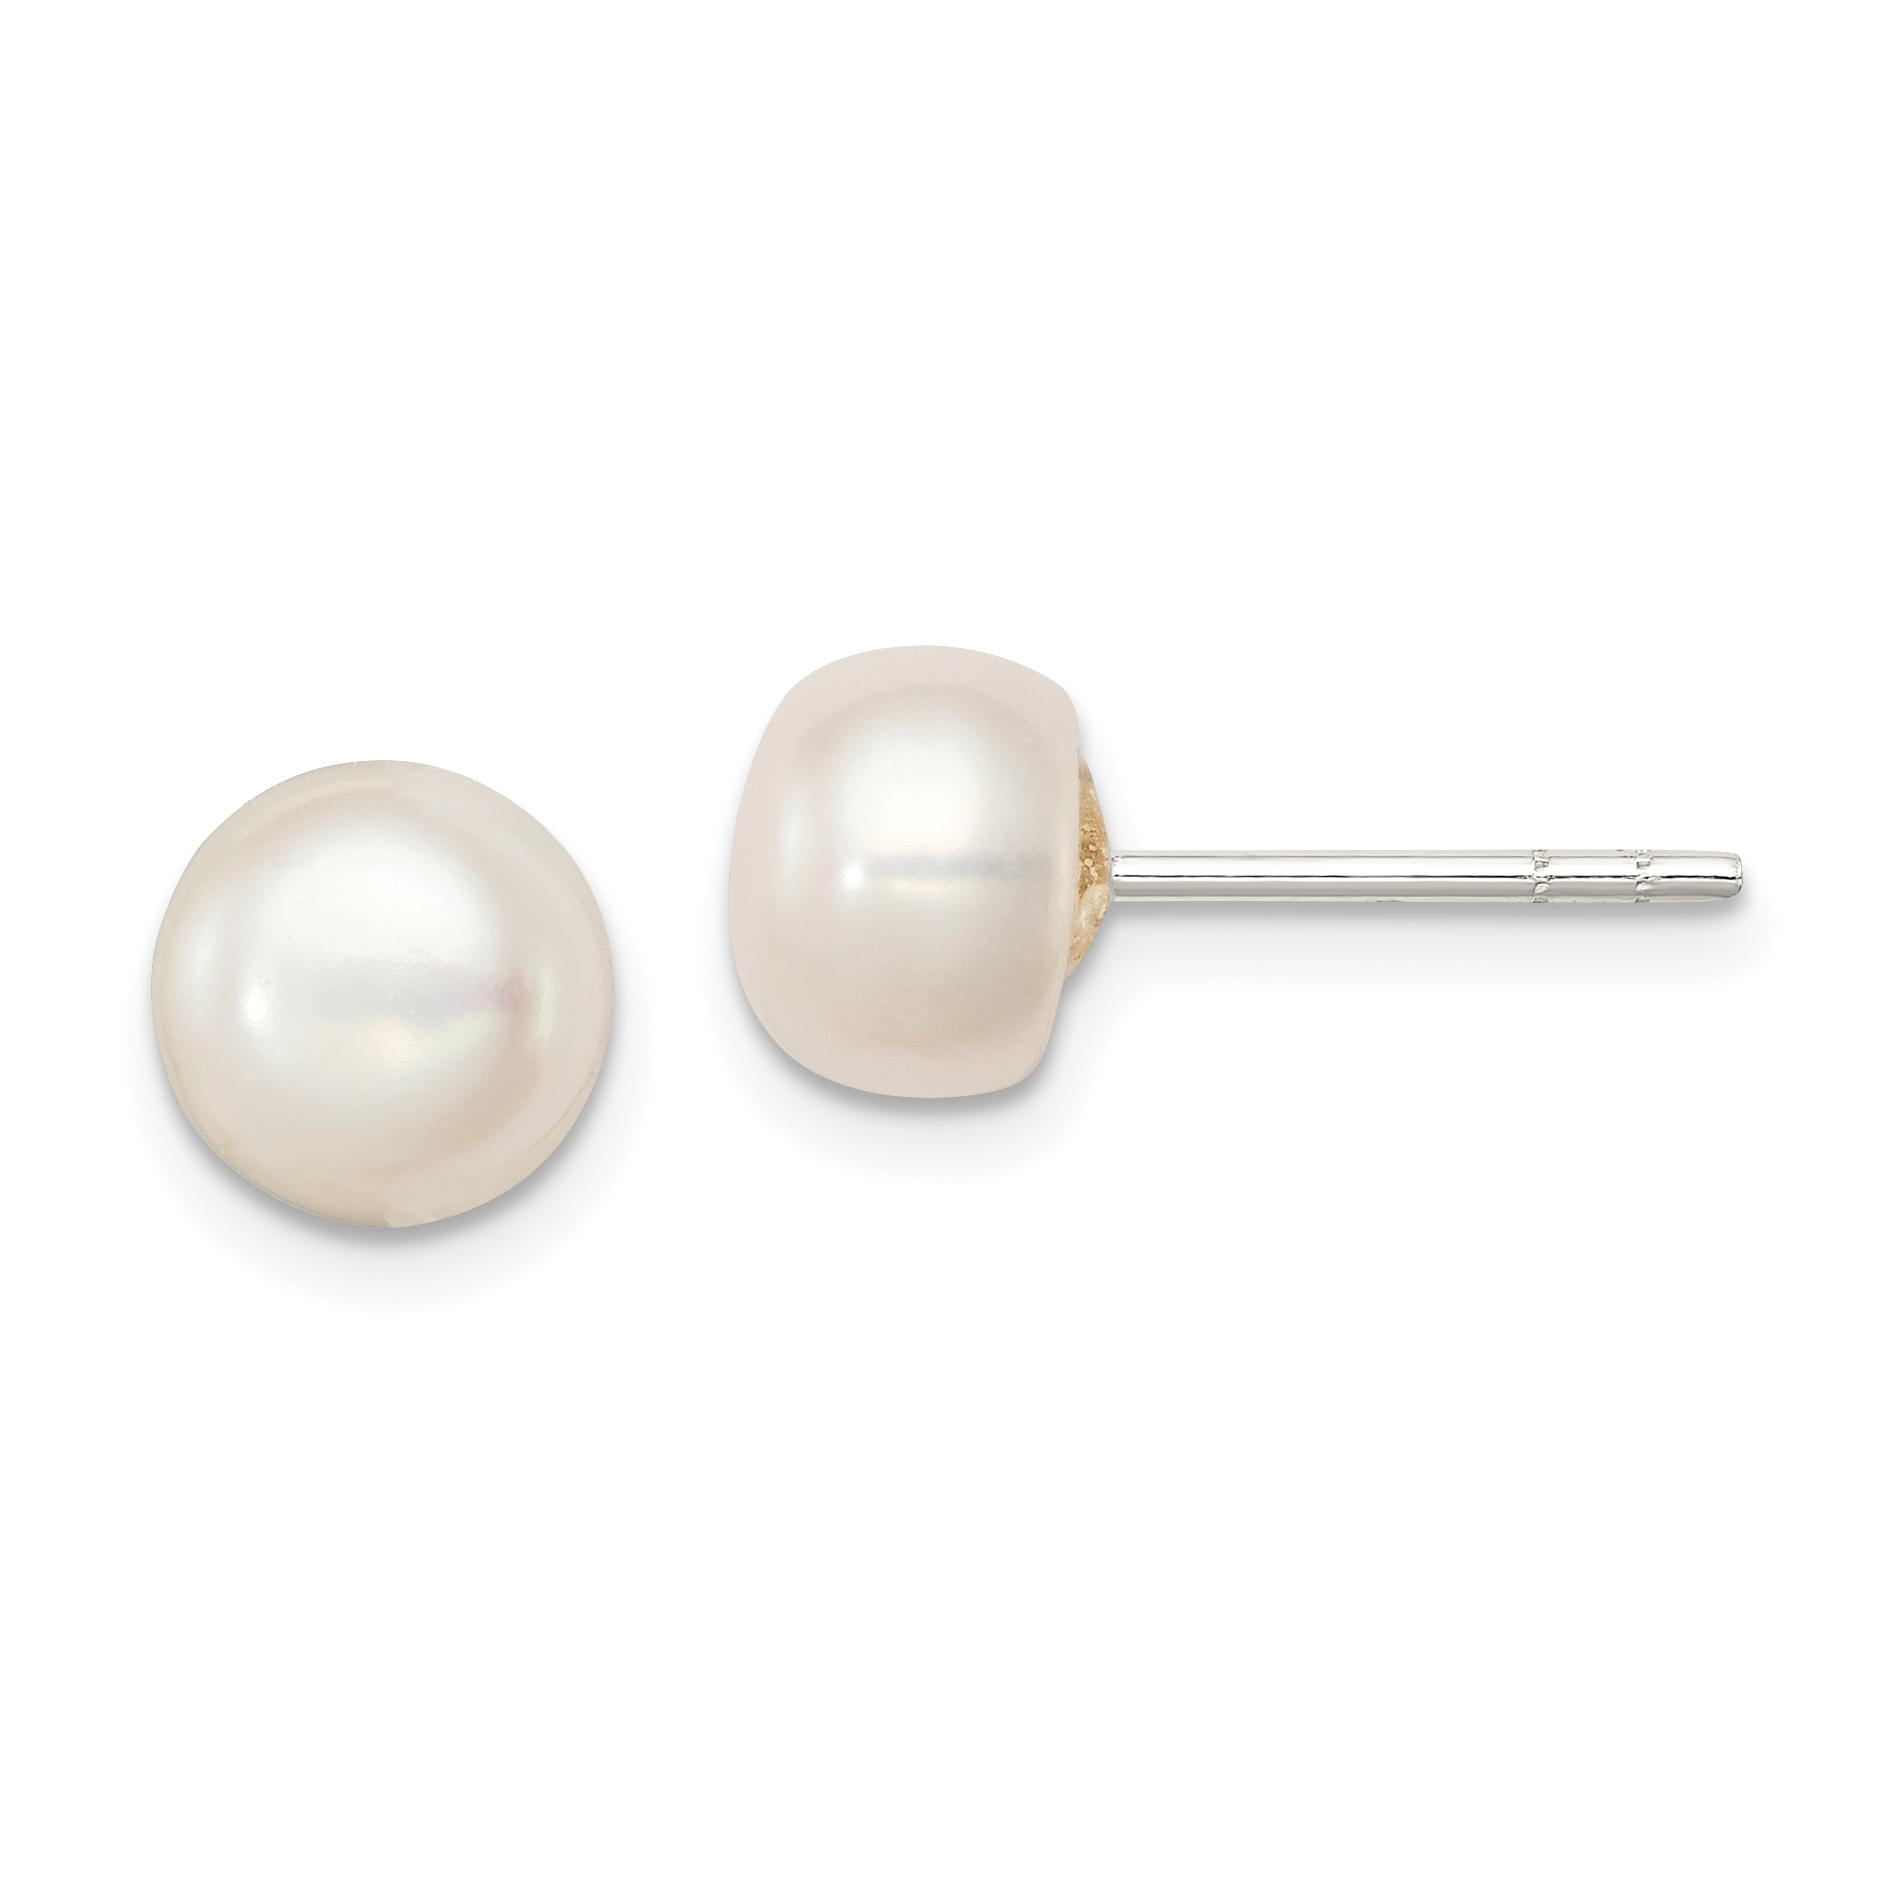 Core Silver Sterling Silver White FW Cultured Pearl 7-7.5mm Button Earrings